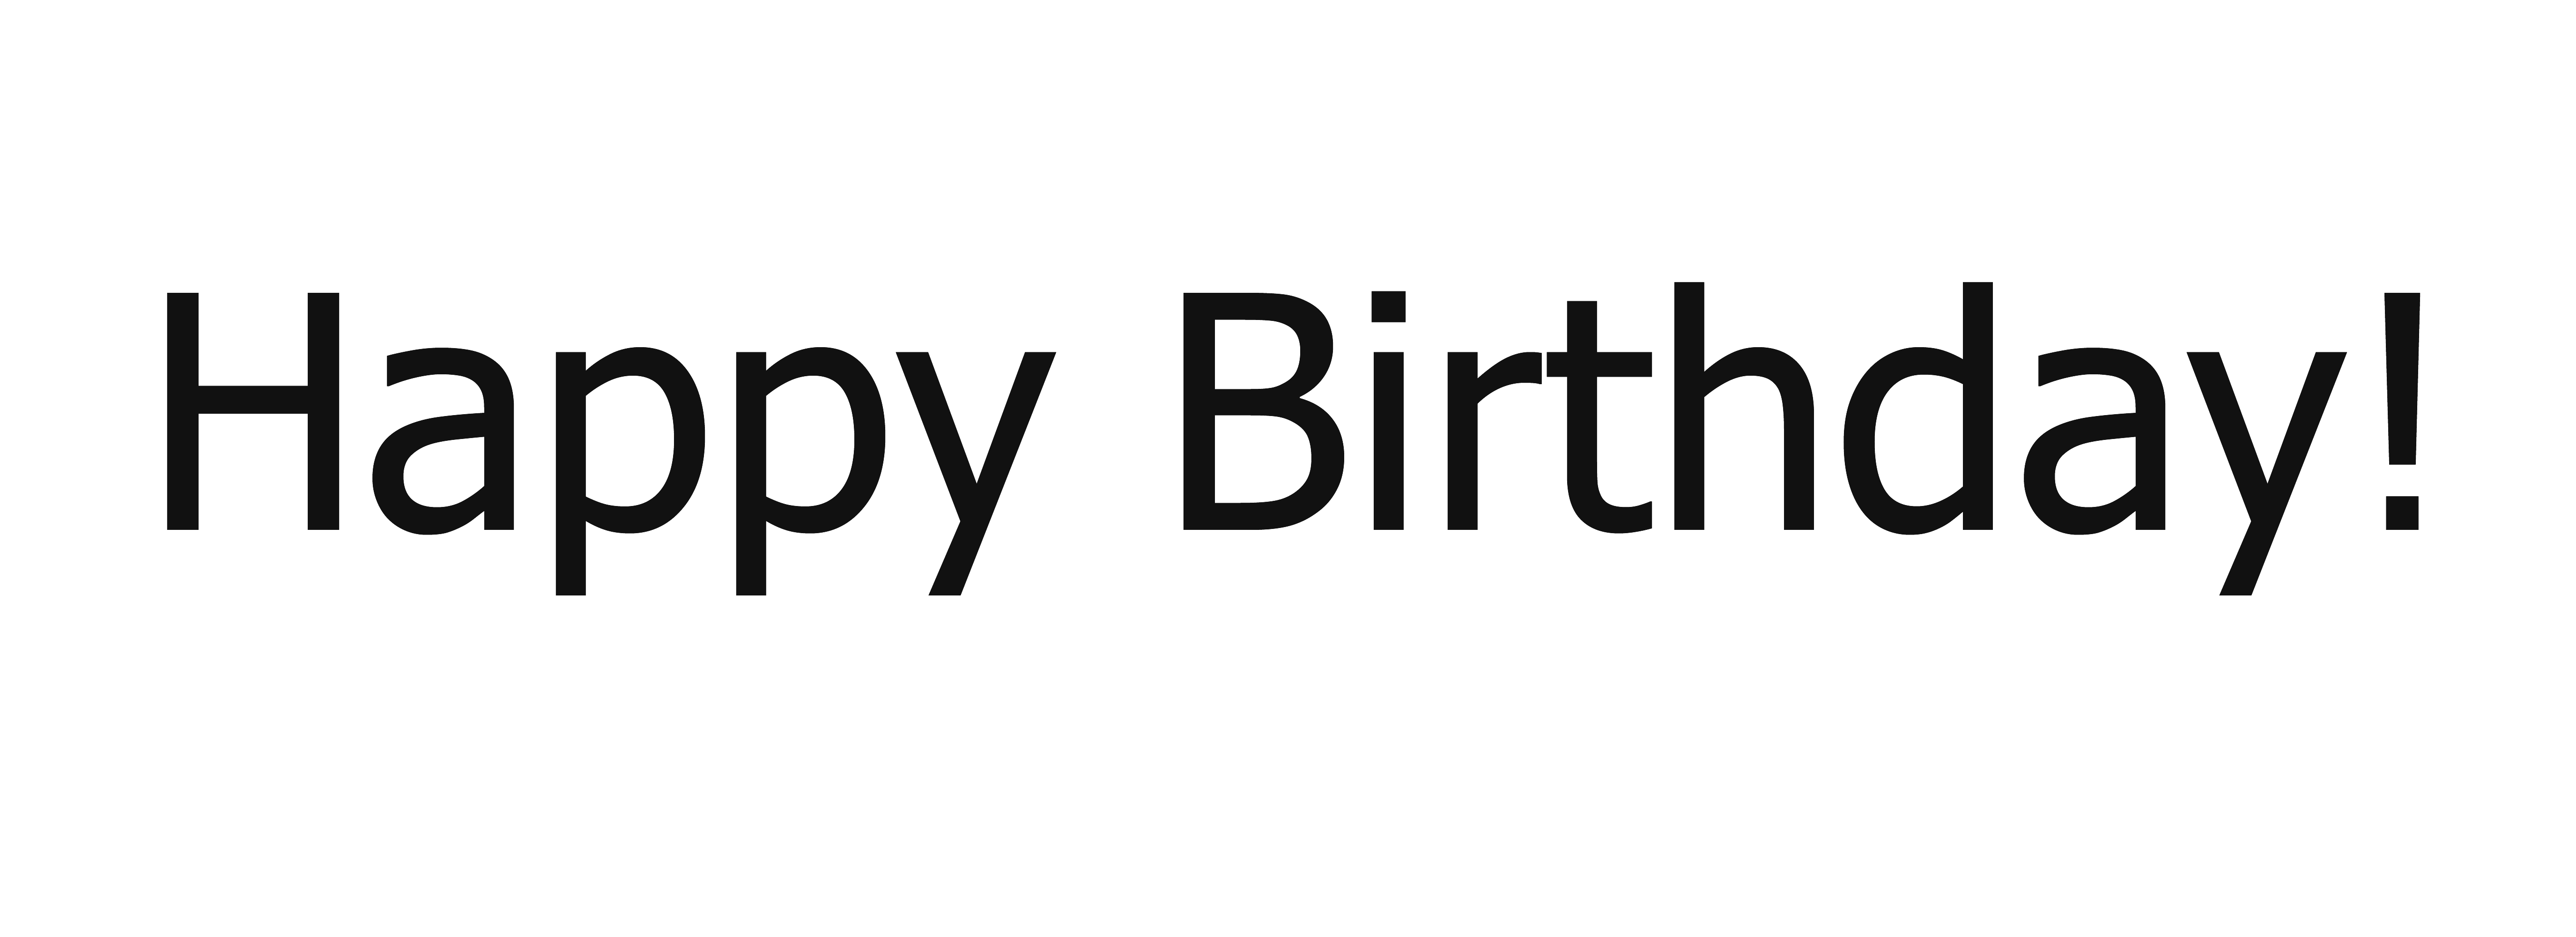 Happy Birthday Download Free PNG